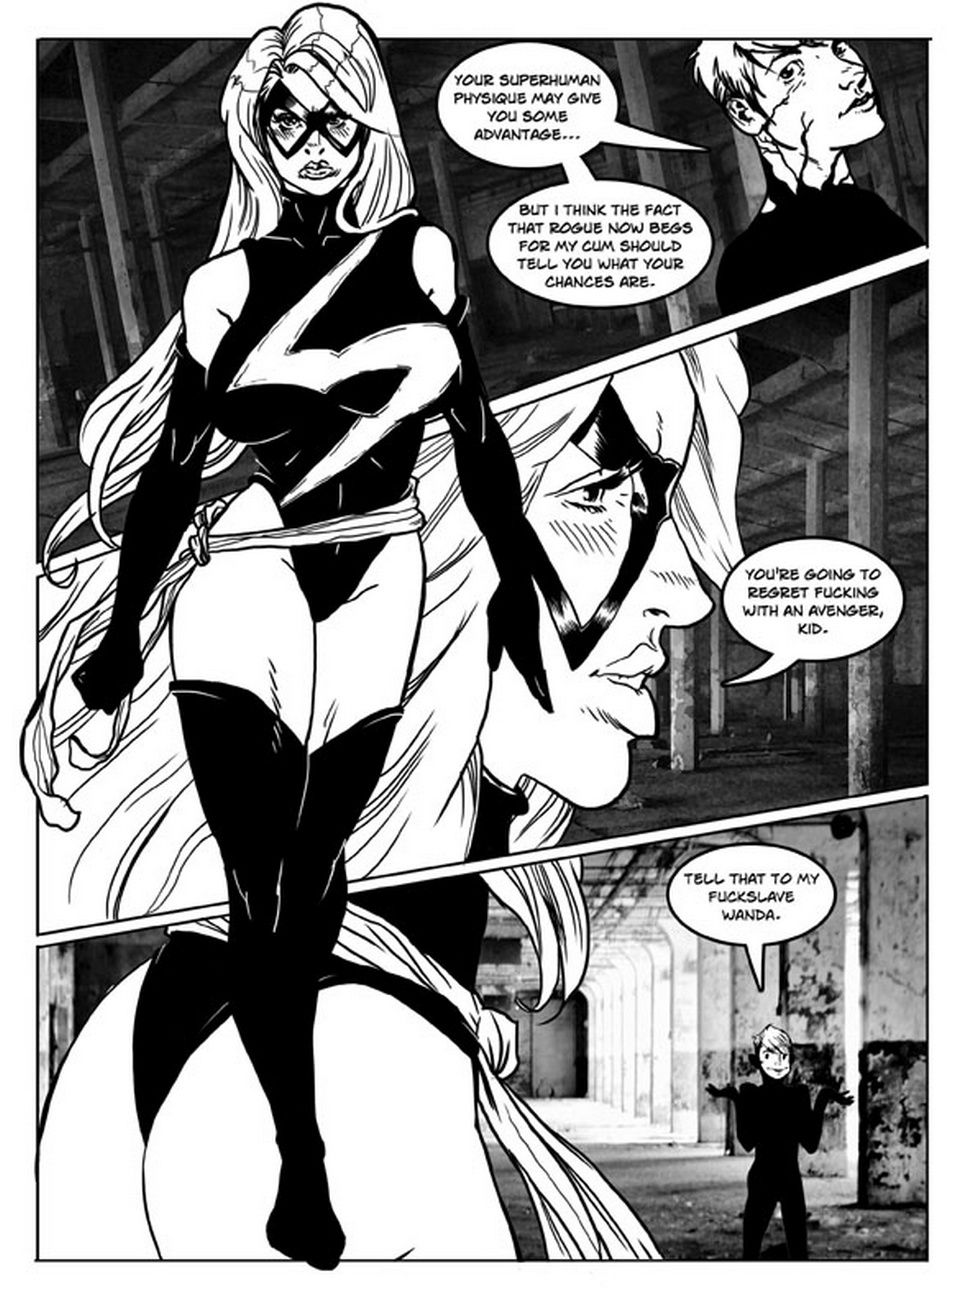 Submission Agenda 10 - Ms Marvel page 3